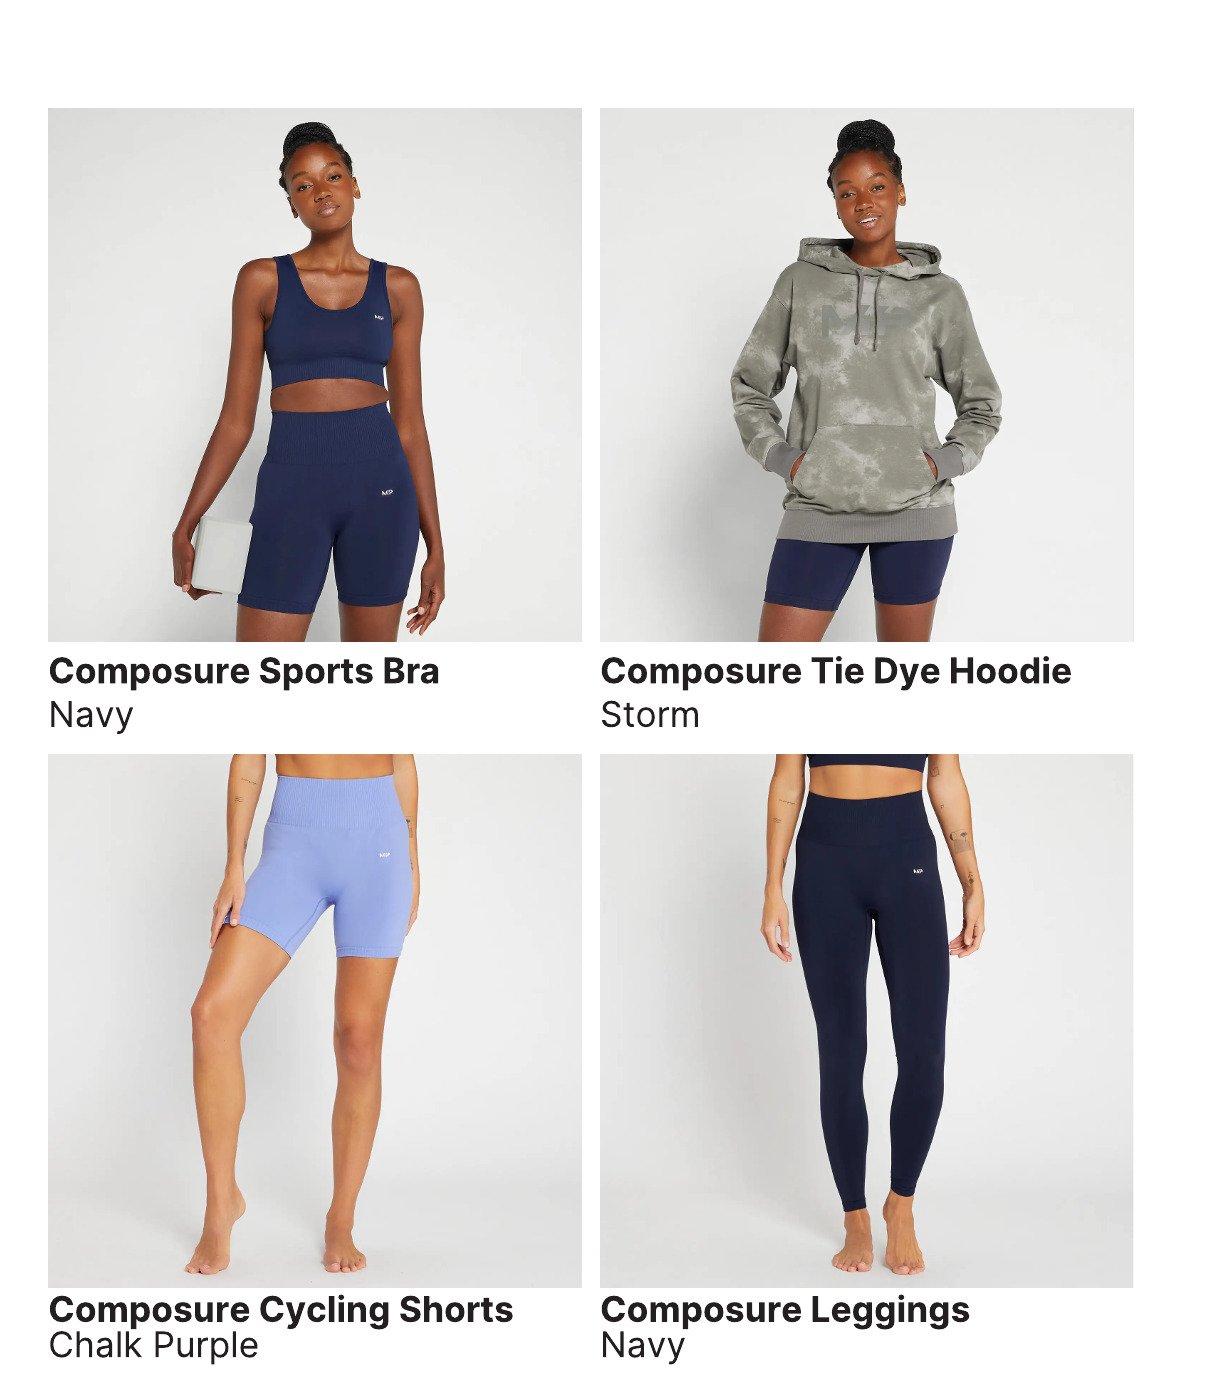 https://www.myprotein.com/clothing/collections/composure/products.list?pageNumber=1&facetFilters=en_gender_content:Women